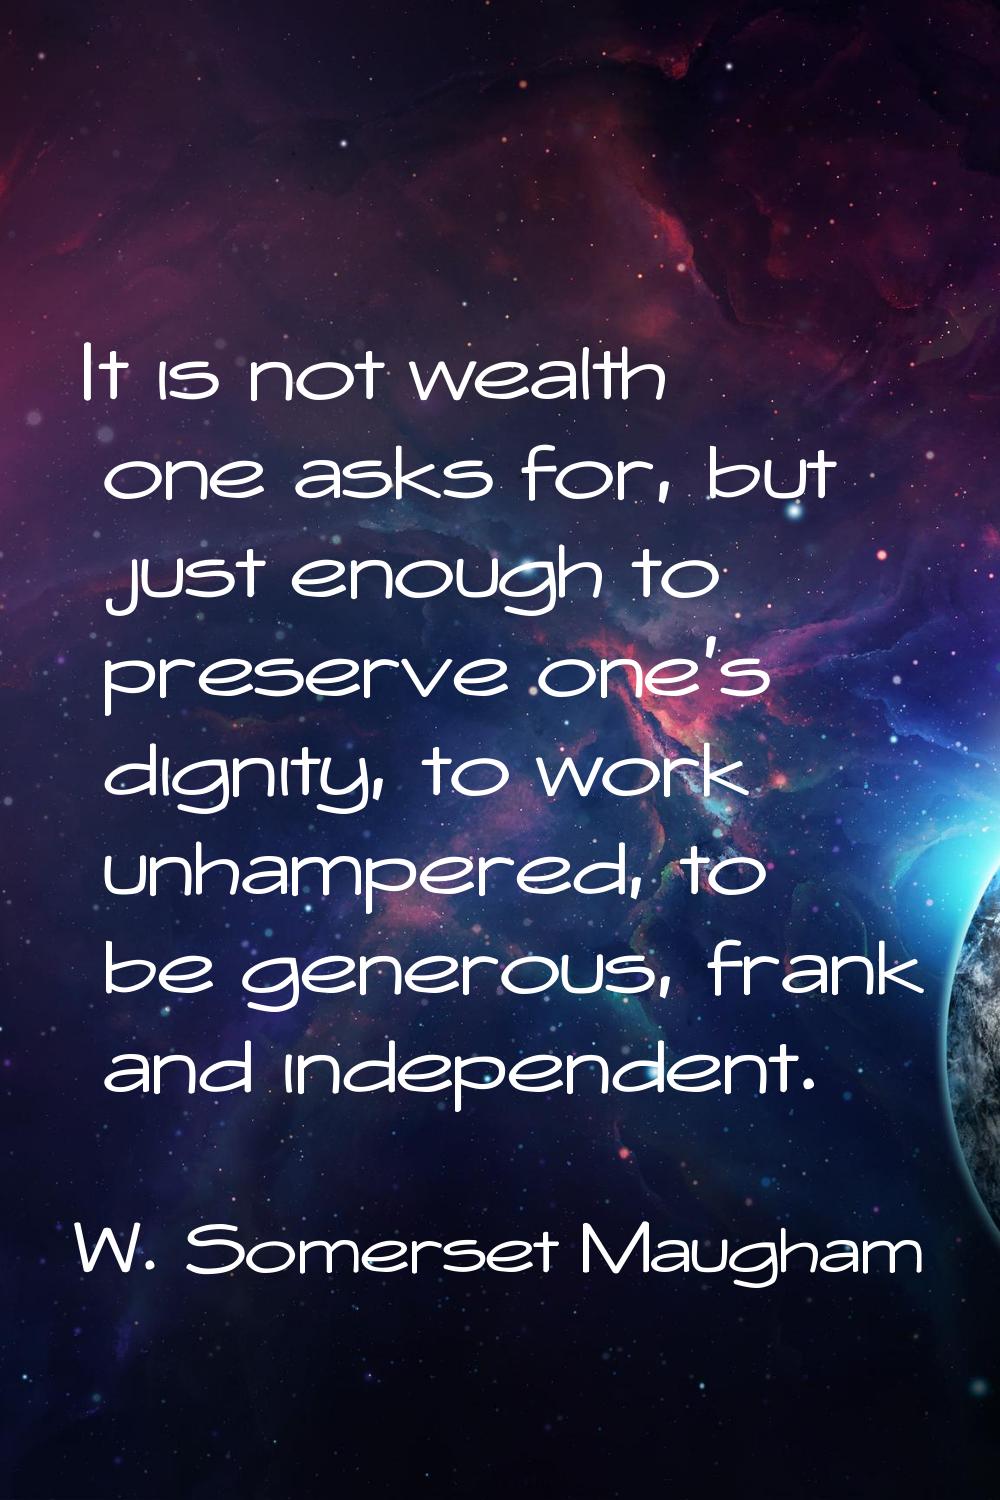 It is not wealth one asks for, but just enough to preserve one's dignity, to work unhampered, to be